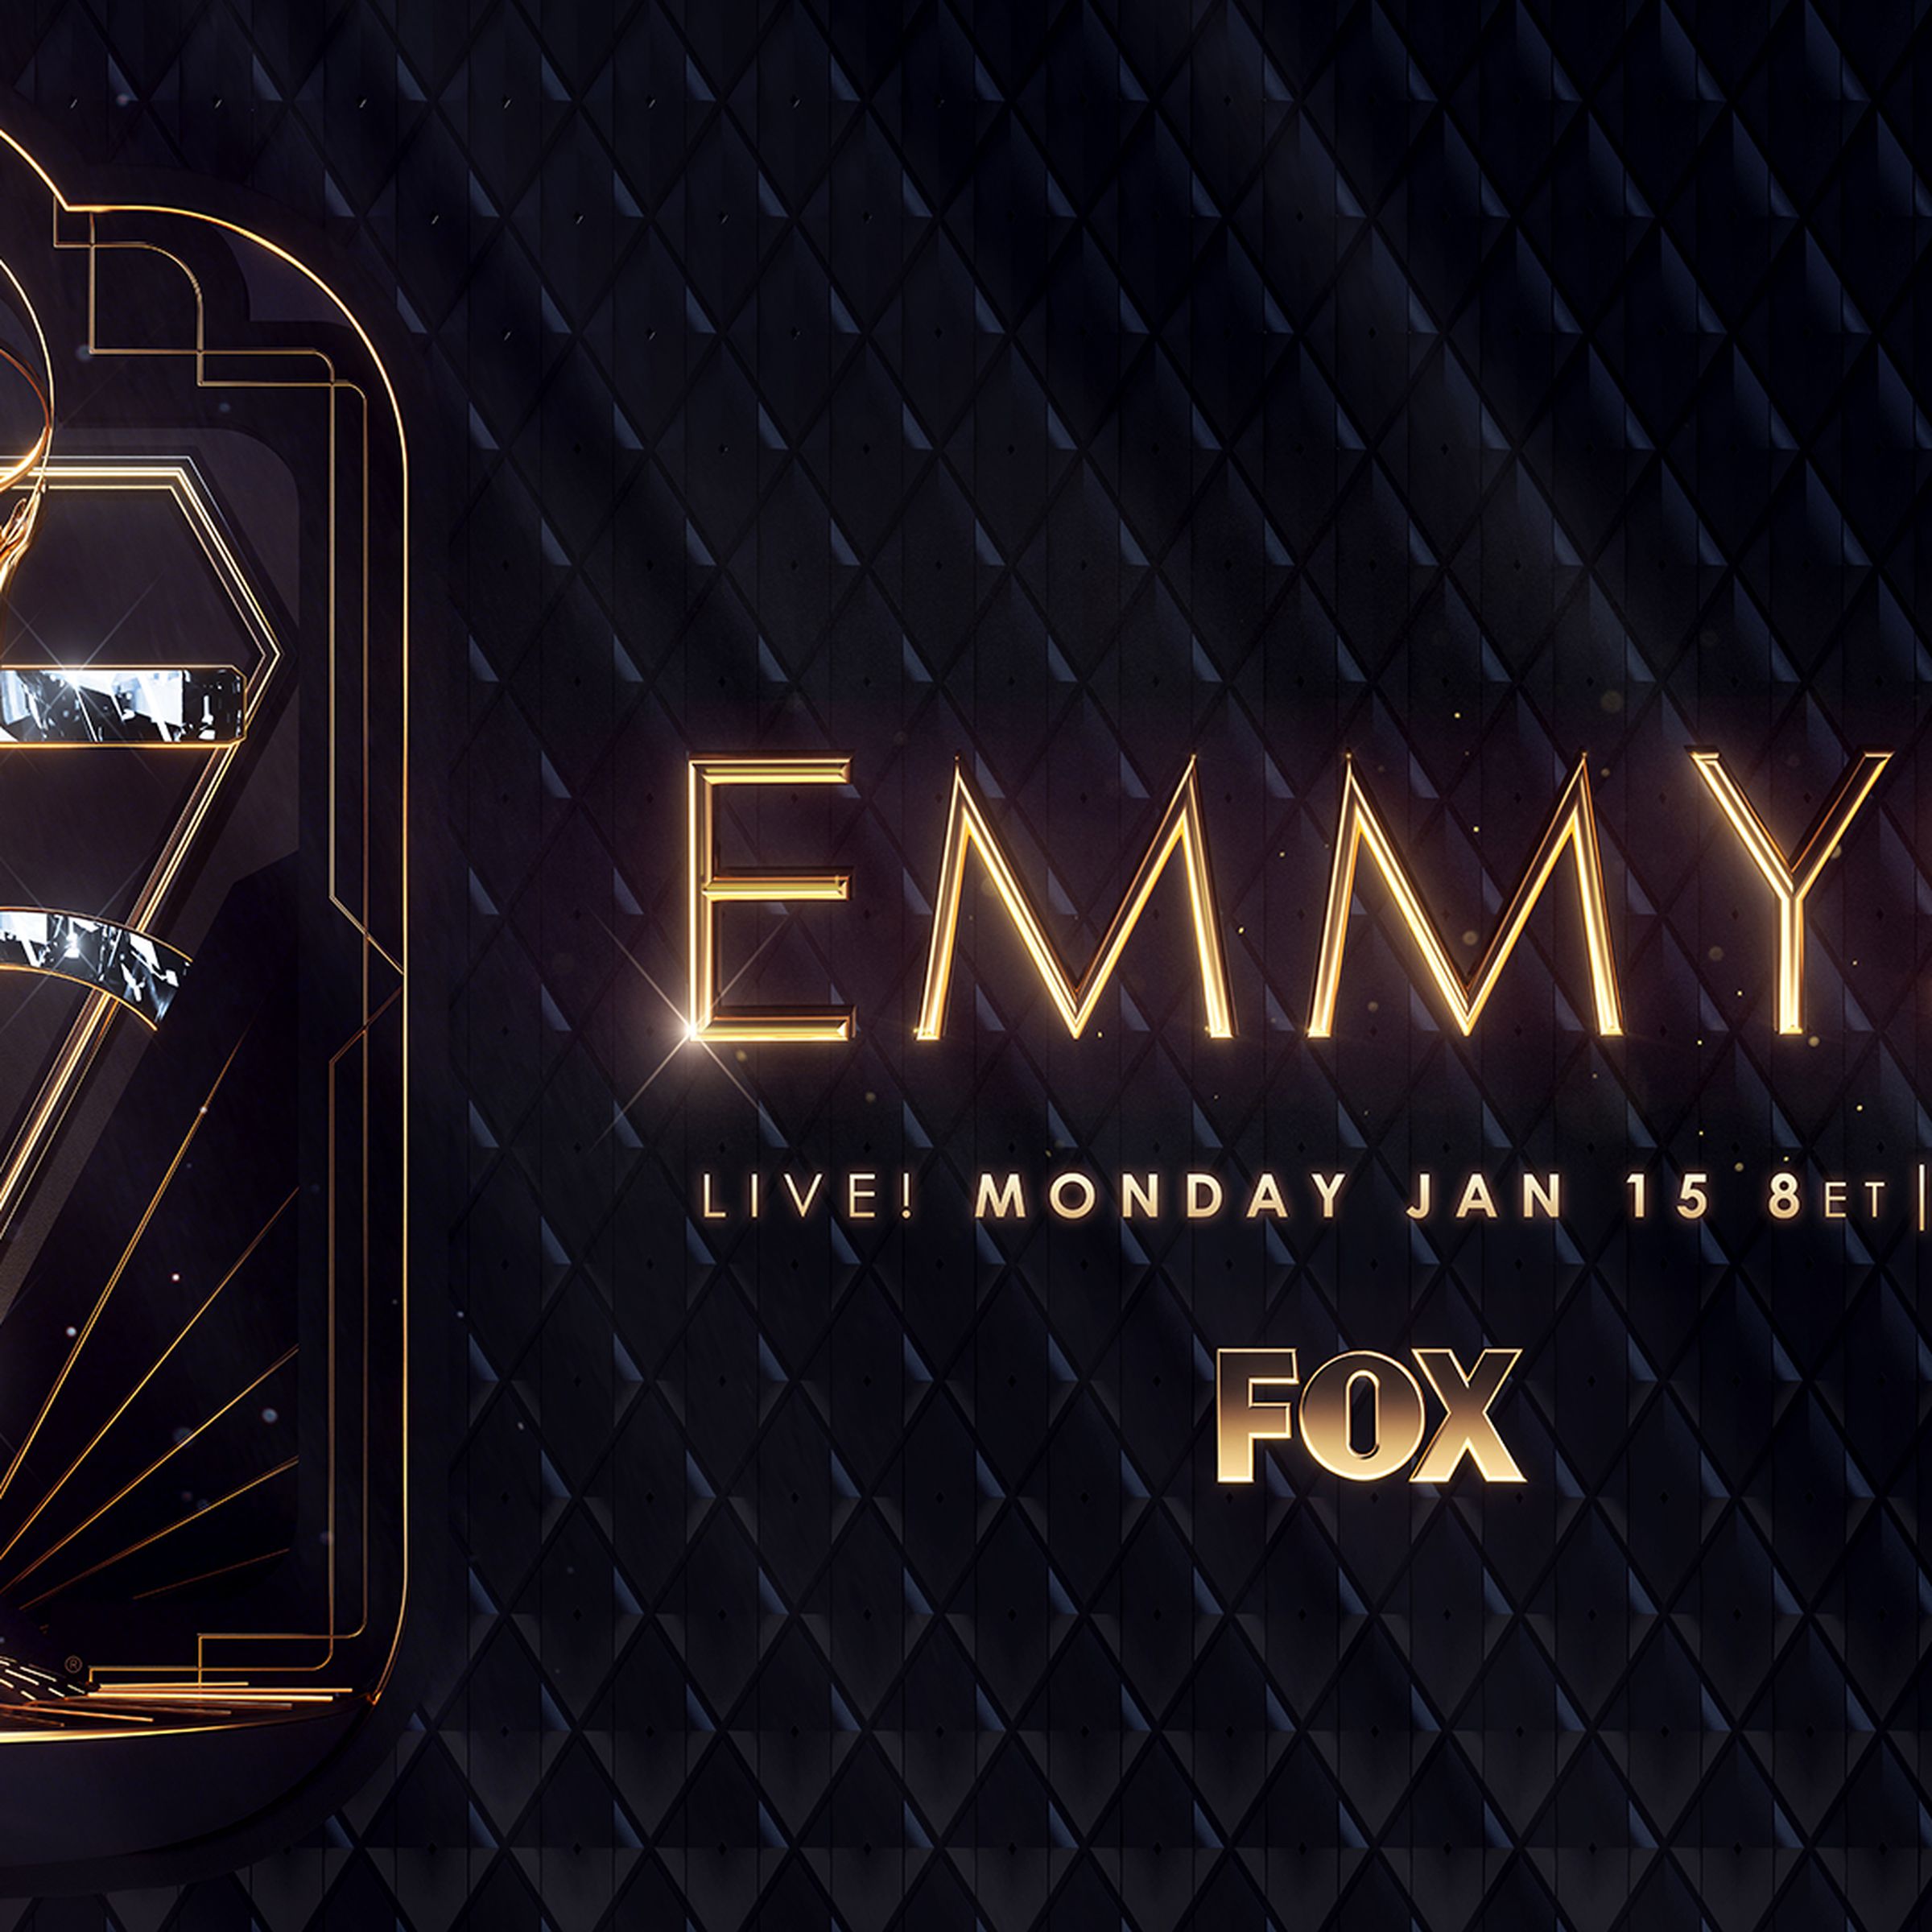 A graphic showing the Emmys on Fox